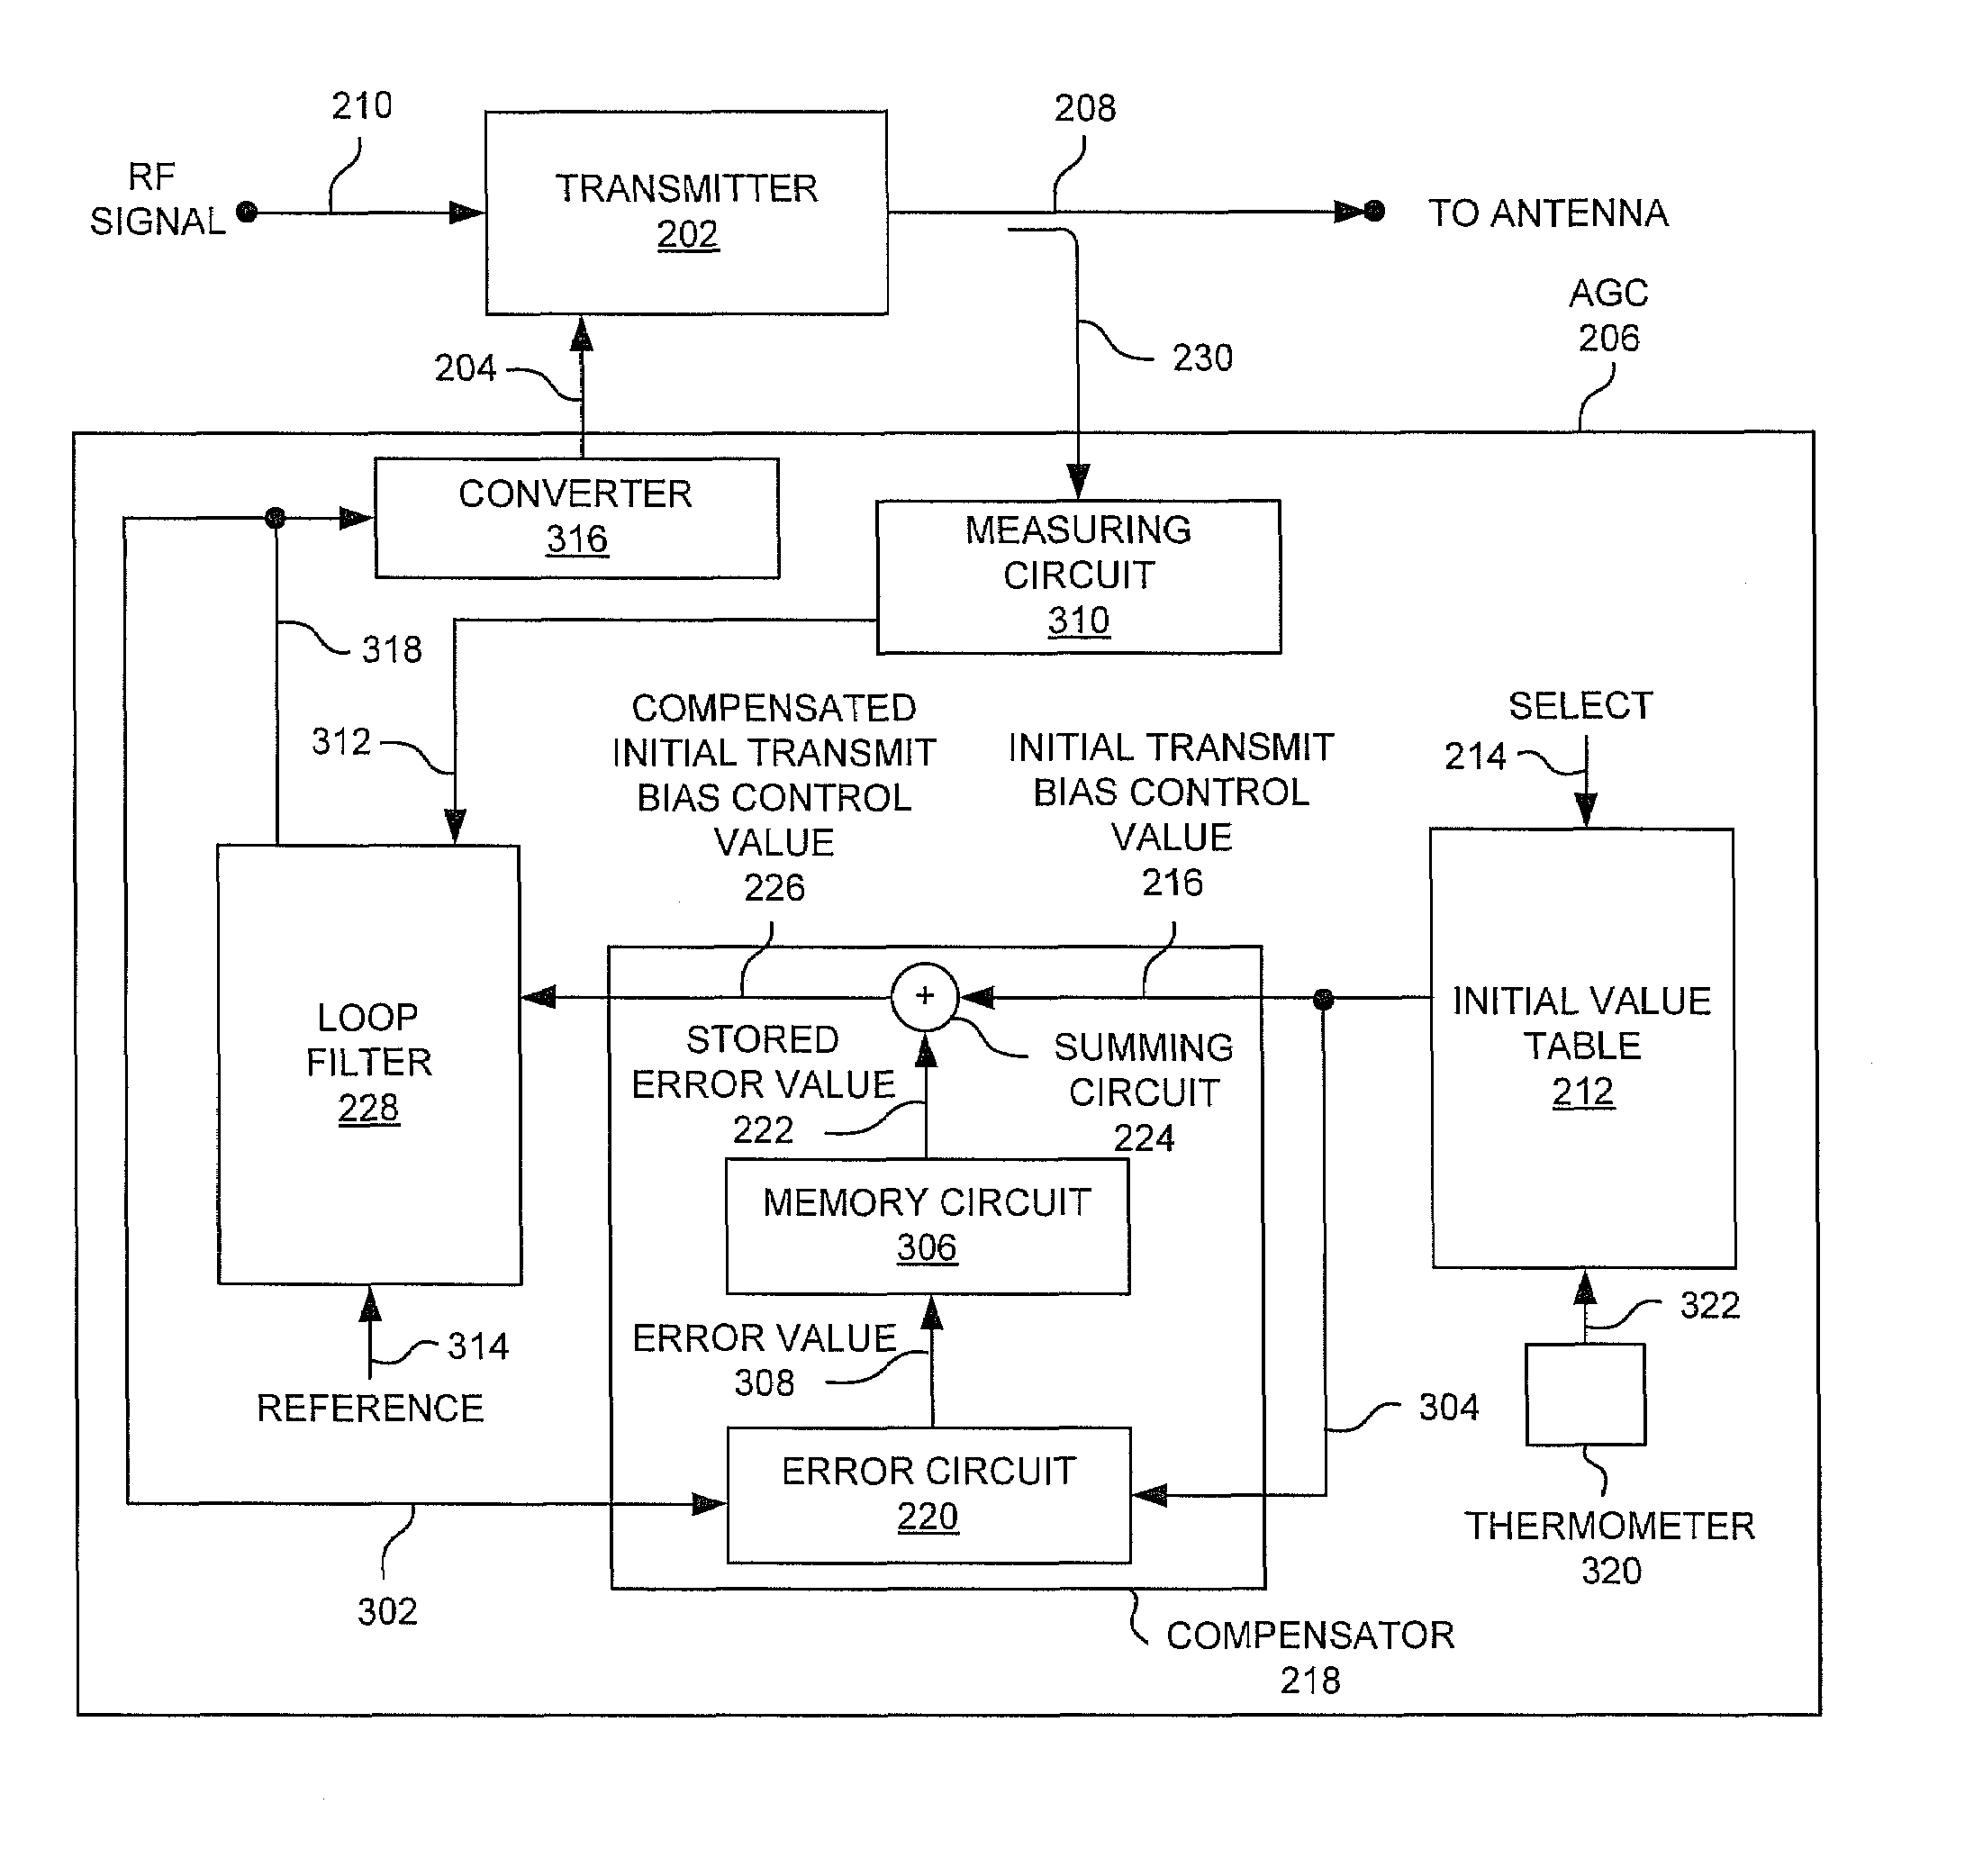 System and method for controlling transmitter output levels in a wireless communications device